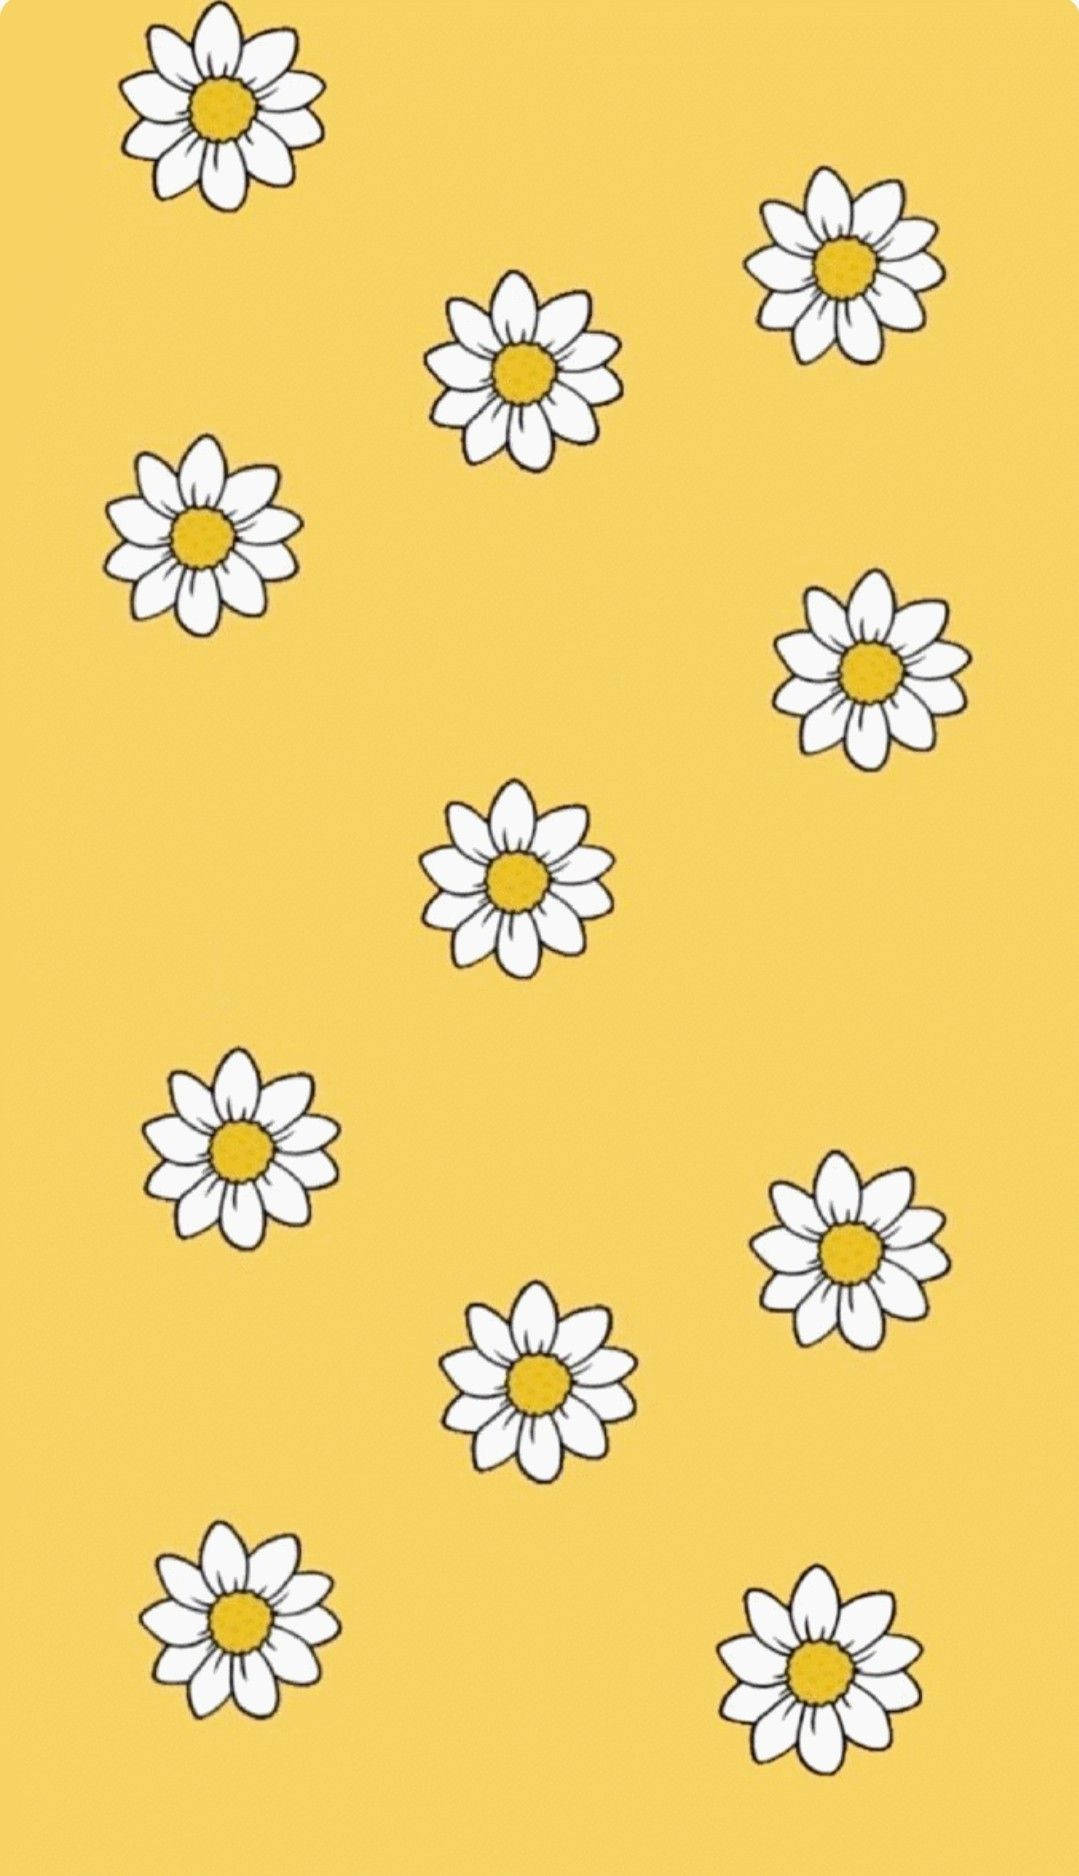 Yellow Aesthetic iPhone Wallpaper with high-resolution 1080x1920 pixel. You can use this wallpaper for your iPhone 5, 6, 7, 8, X, XS, XR backgrounds, Mobile Screensaver, or iPad Lock Screen - Pastel yellow, yellow